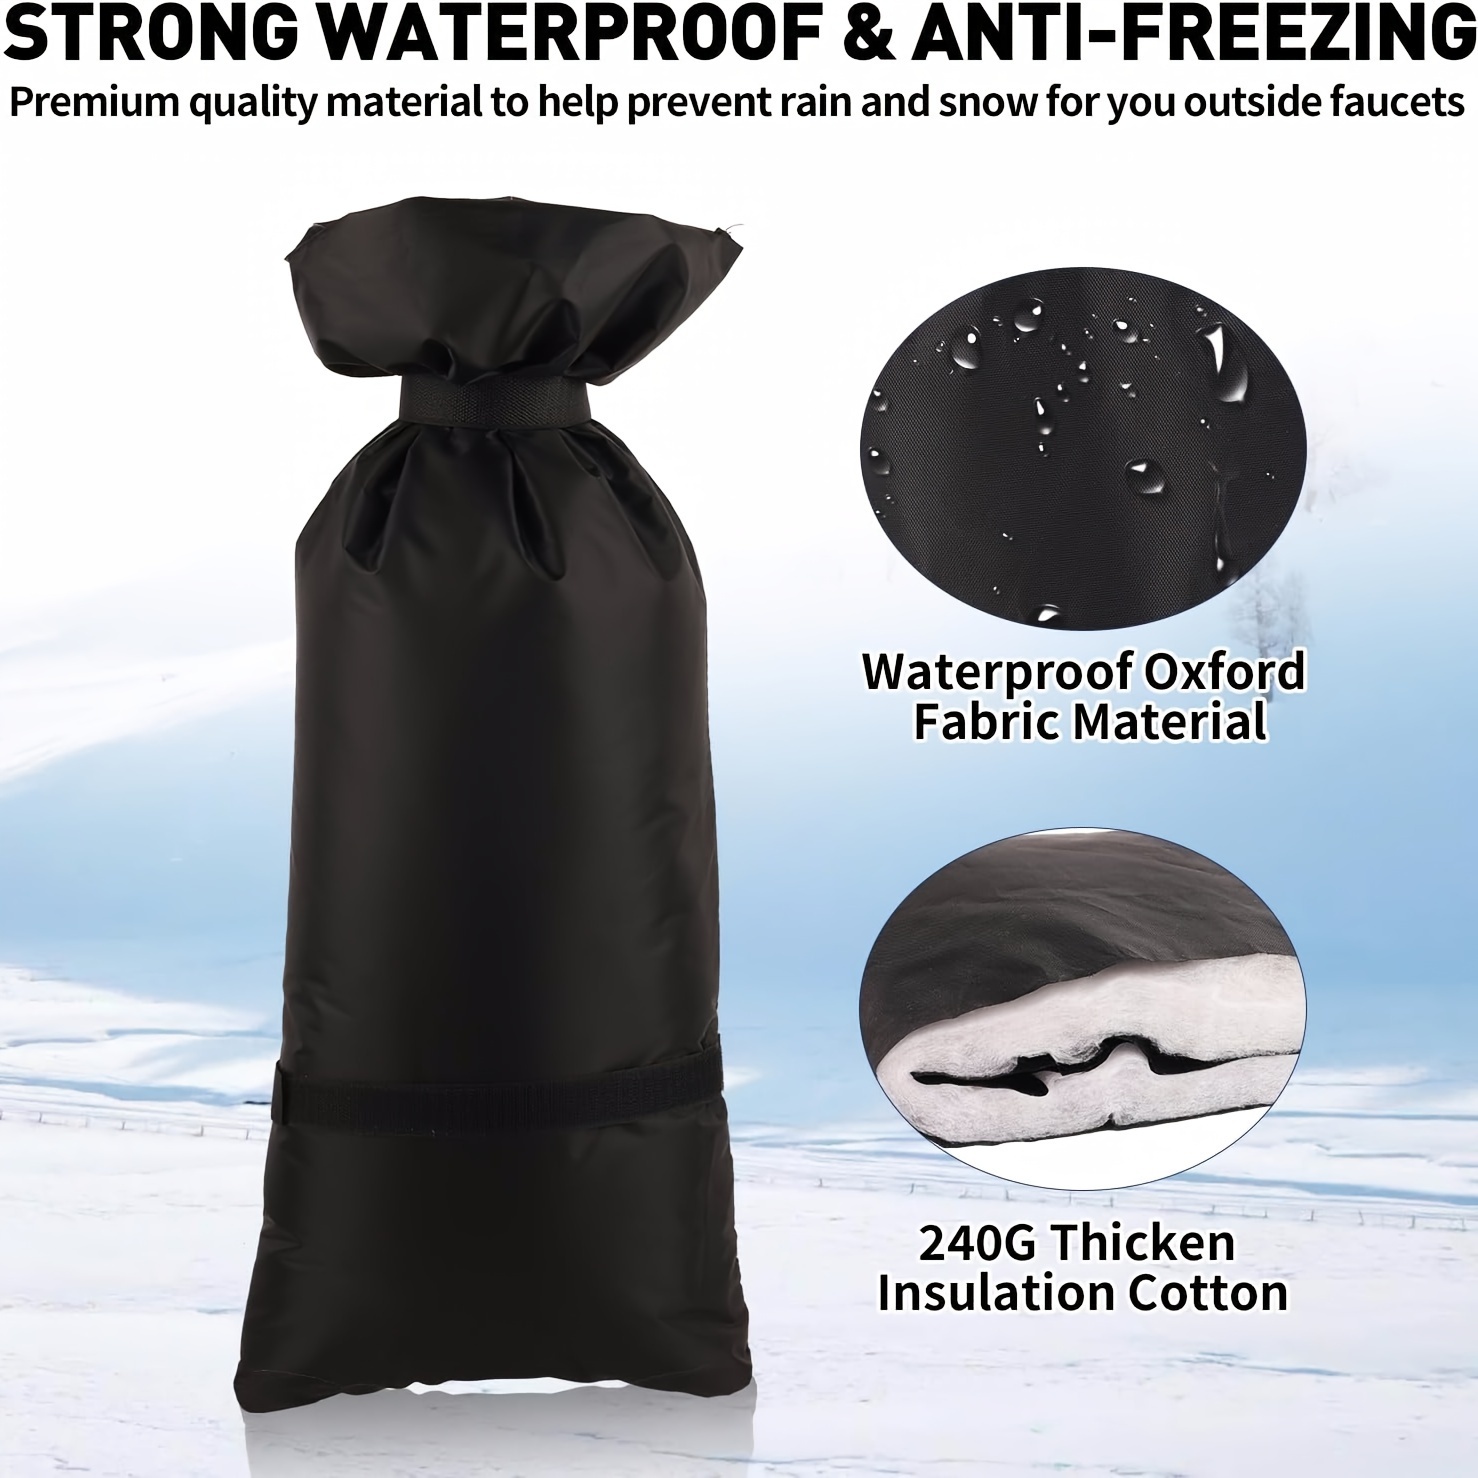 Outdoor Faucet Covers Protector For Winter Freeze Protection - Temu